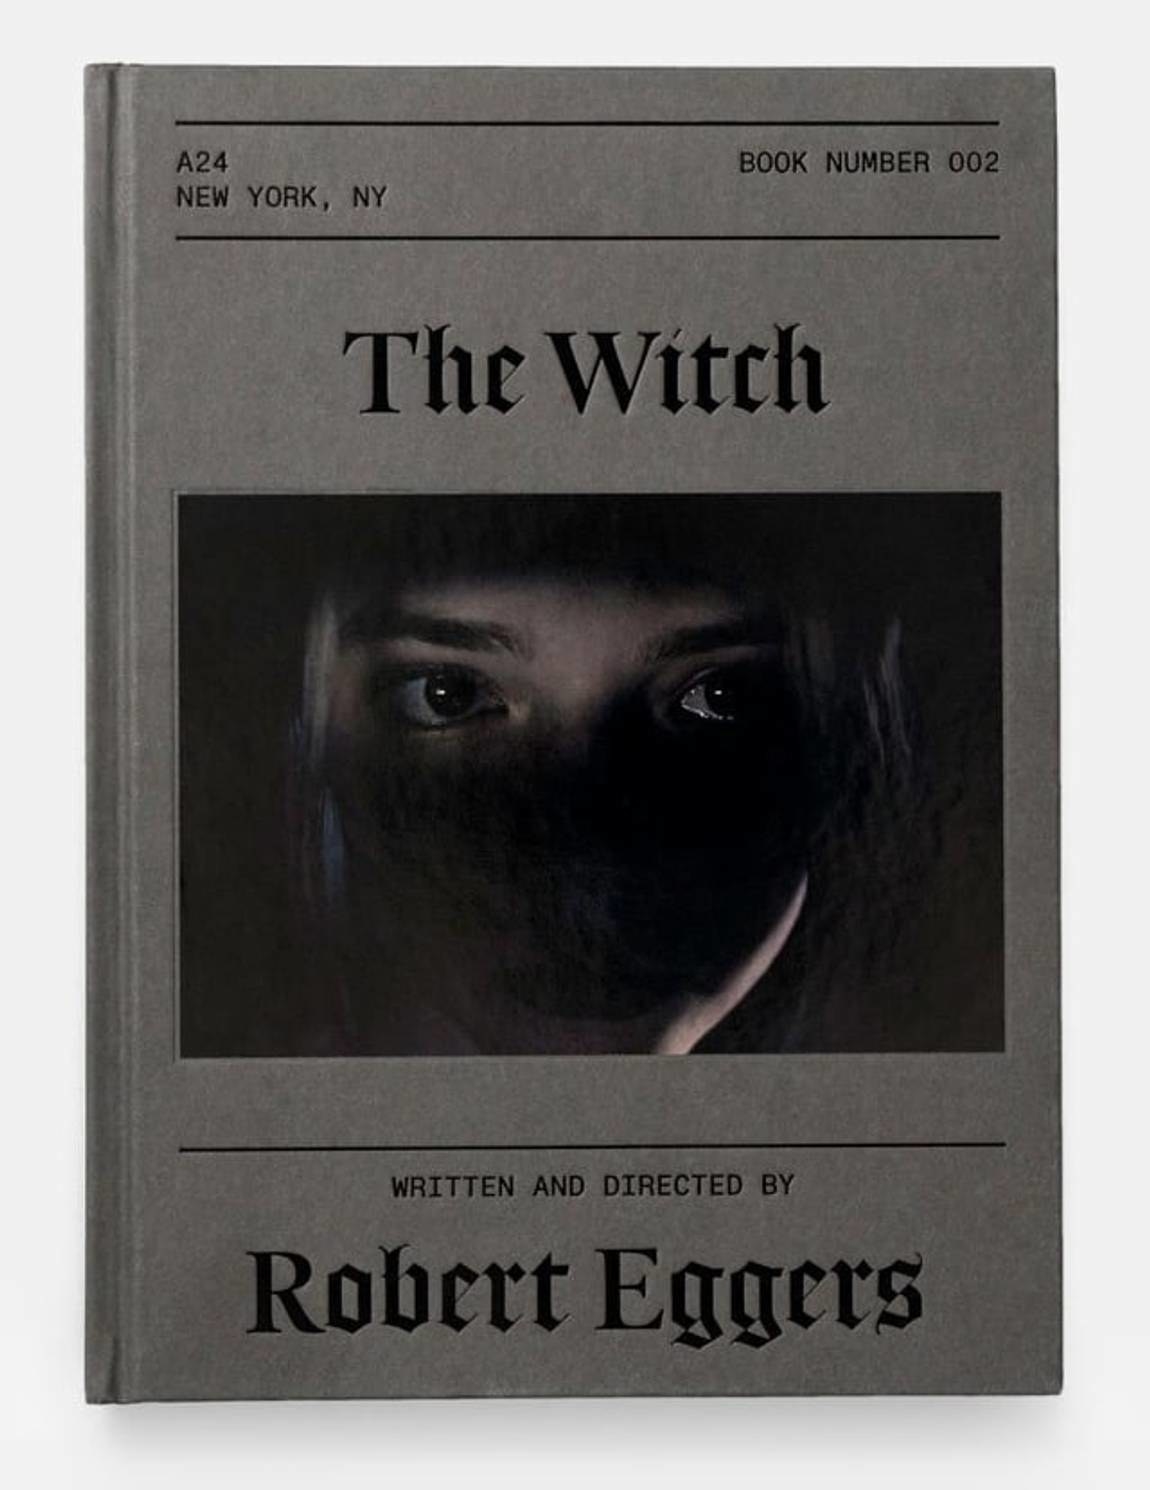 The Witch screenplay book